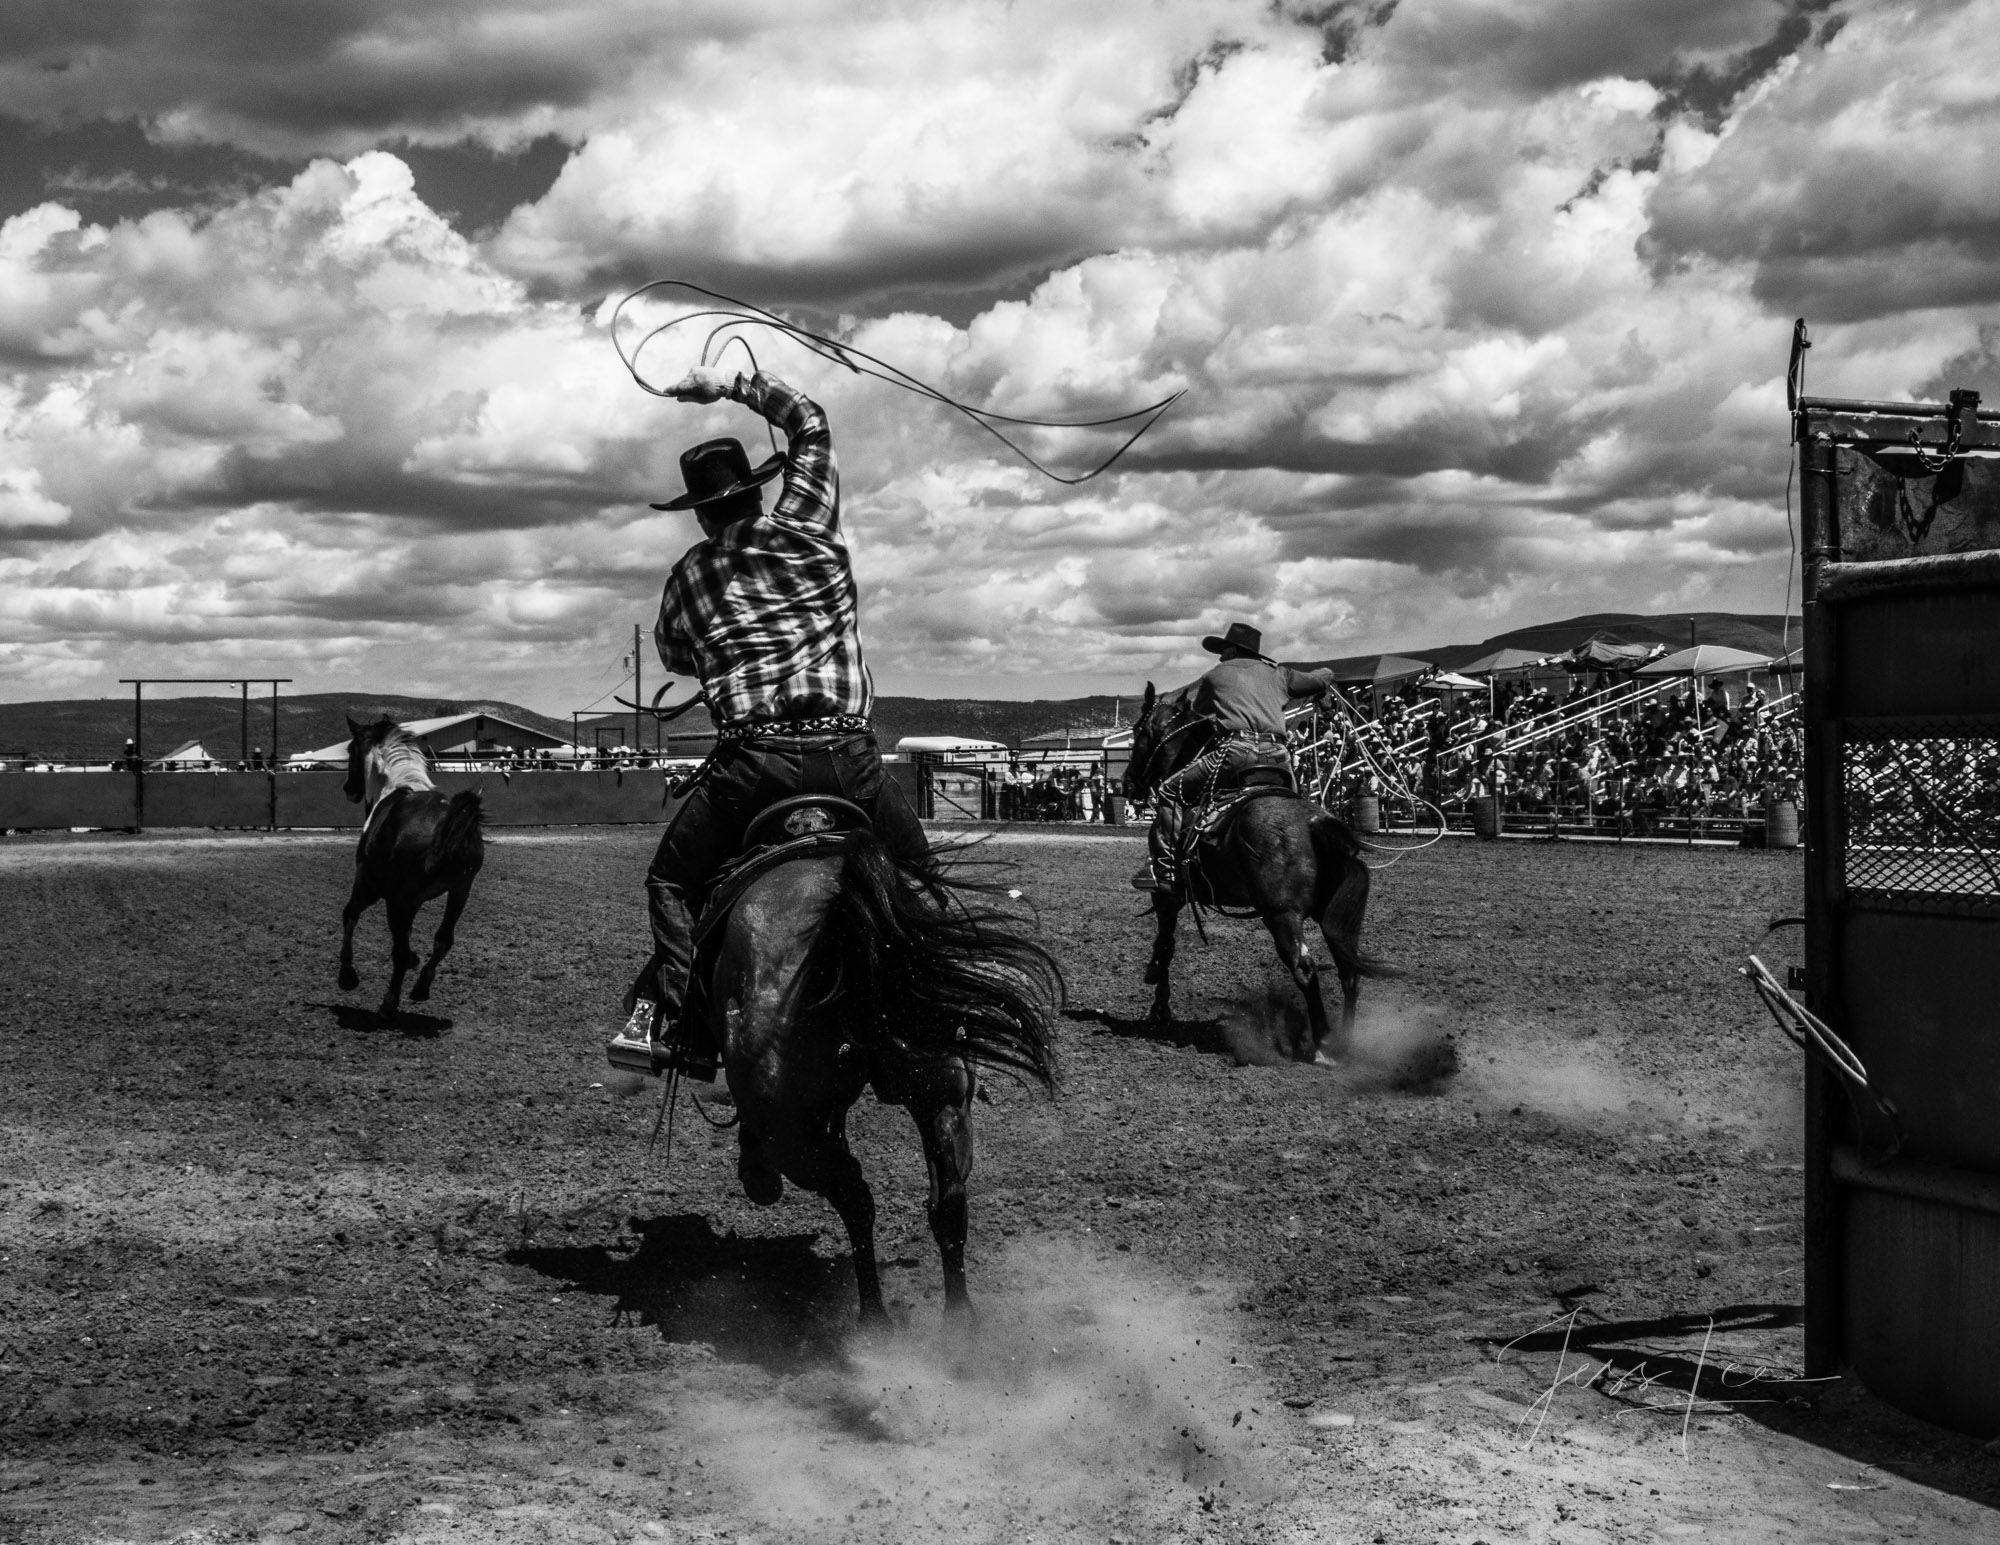 Fine Art Limited Edition Photo Prints of Cowboys, Horses, and life in the West. The Big Loop a Cowboy picture in black and white...